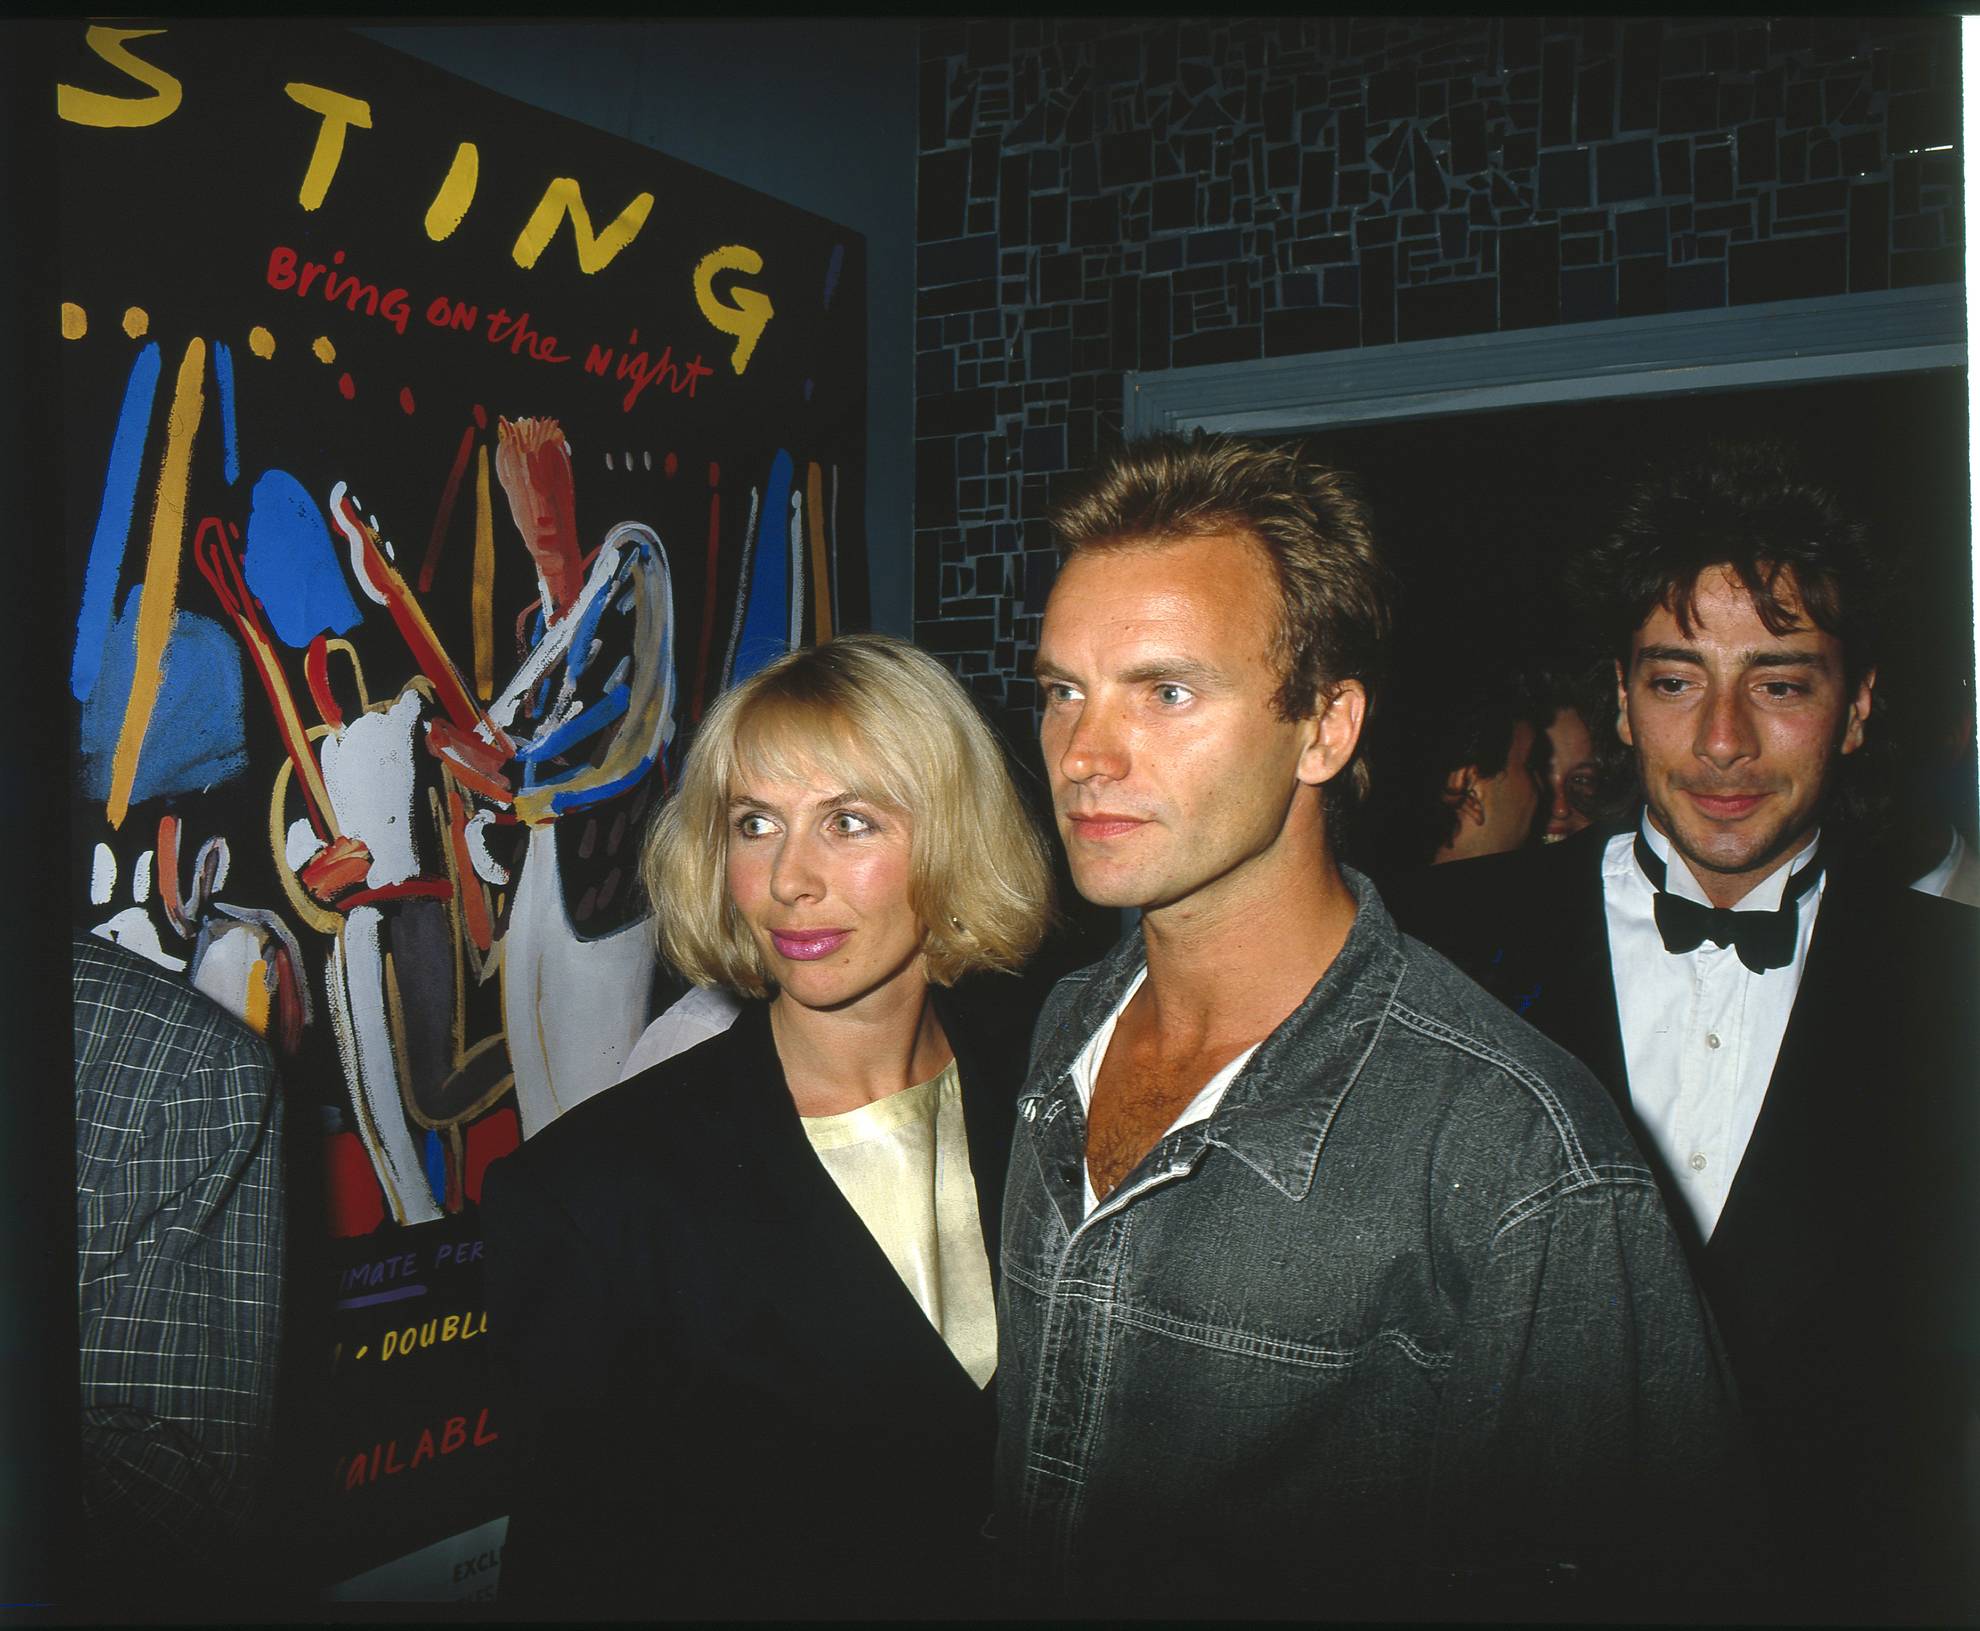 Sting with his wife Trudie in 1986